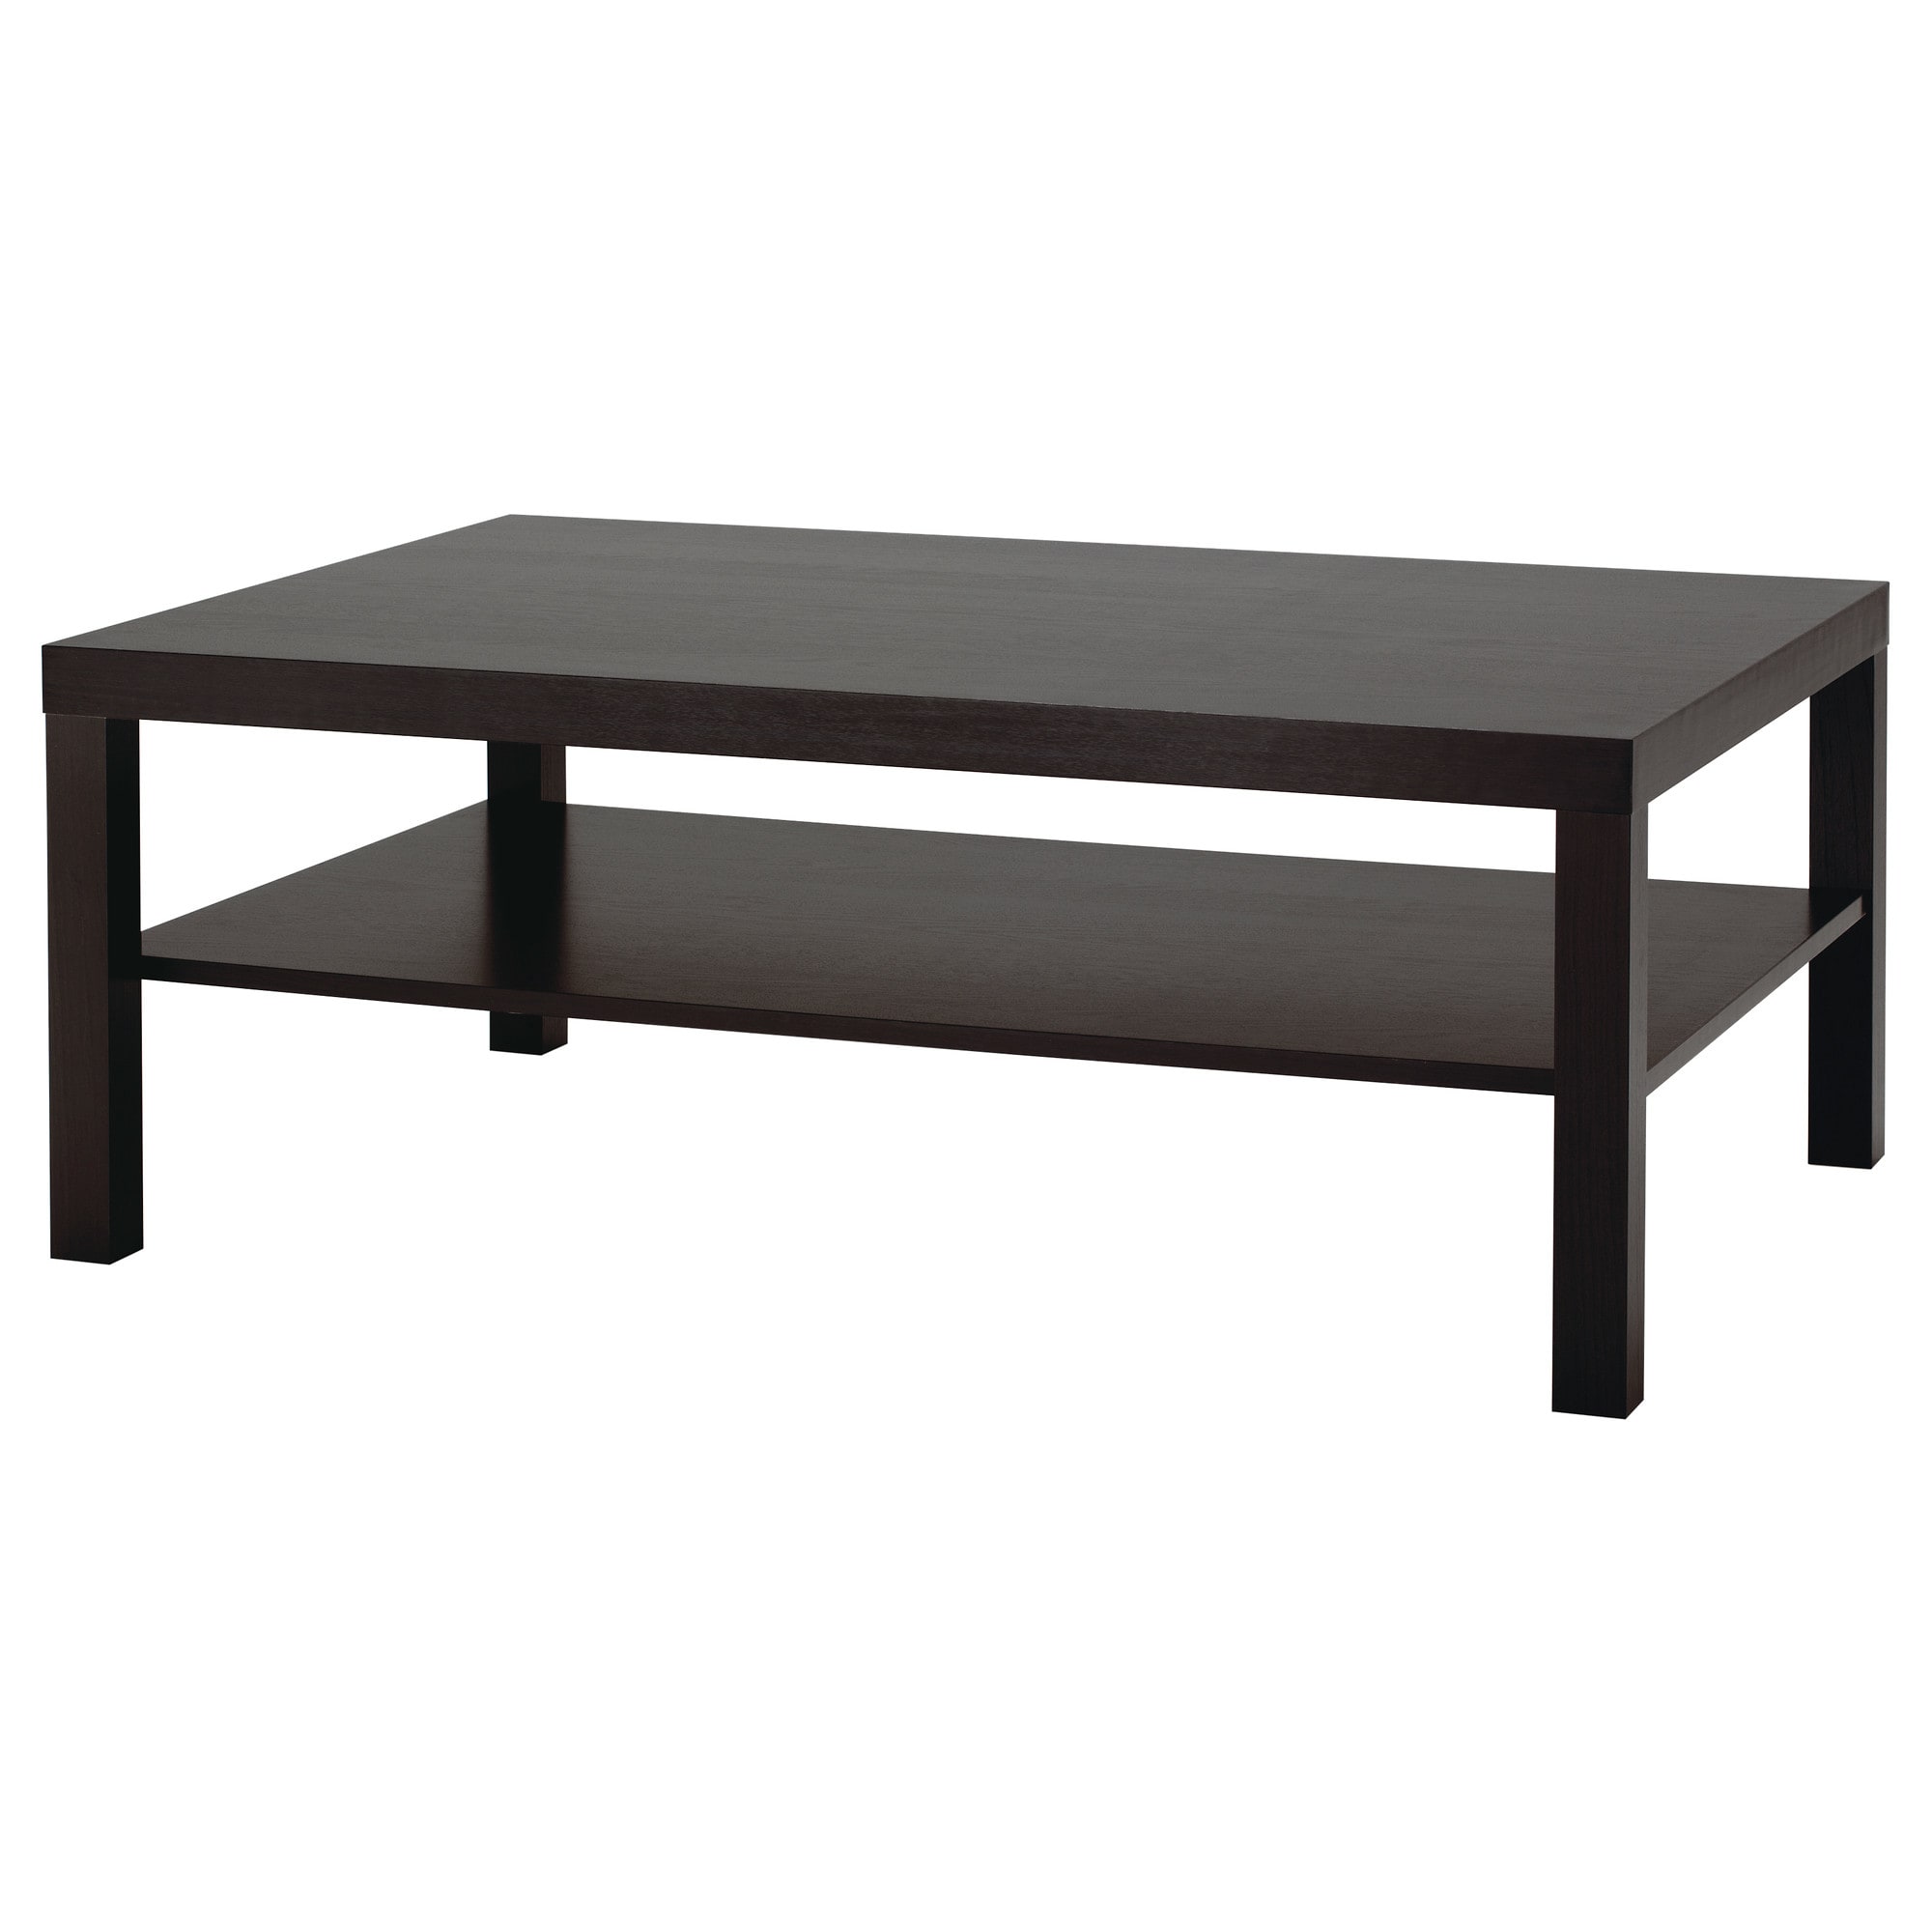 living room countertop legs coffee table kmart big square outdoor side west elm industrial storage wrought iron with glass top large round wood small decorative accent lamps